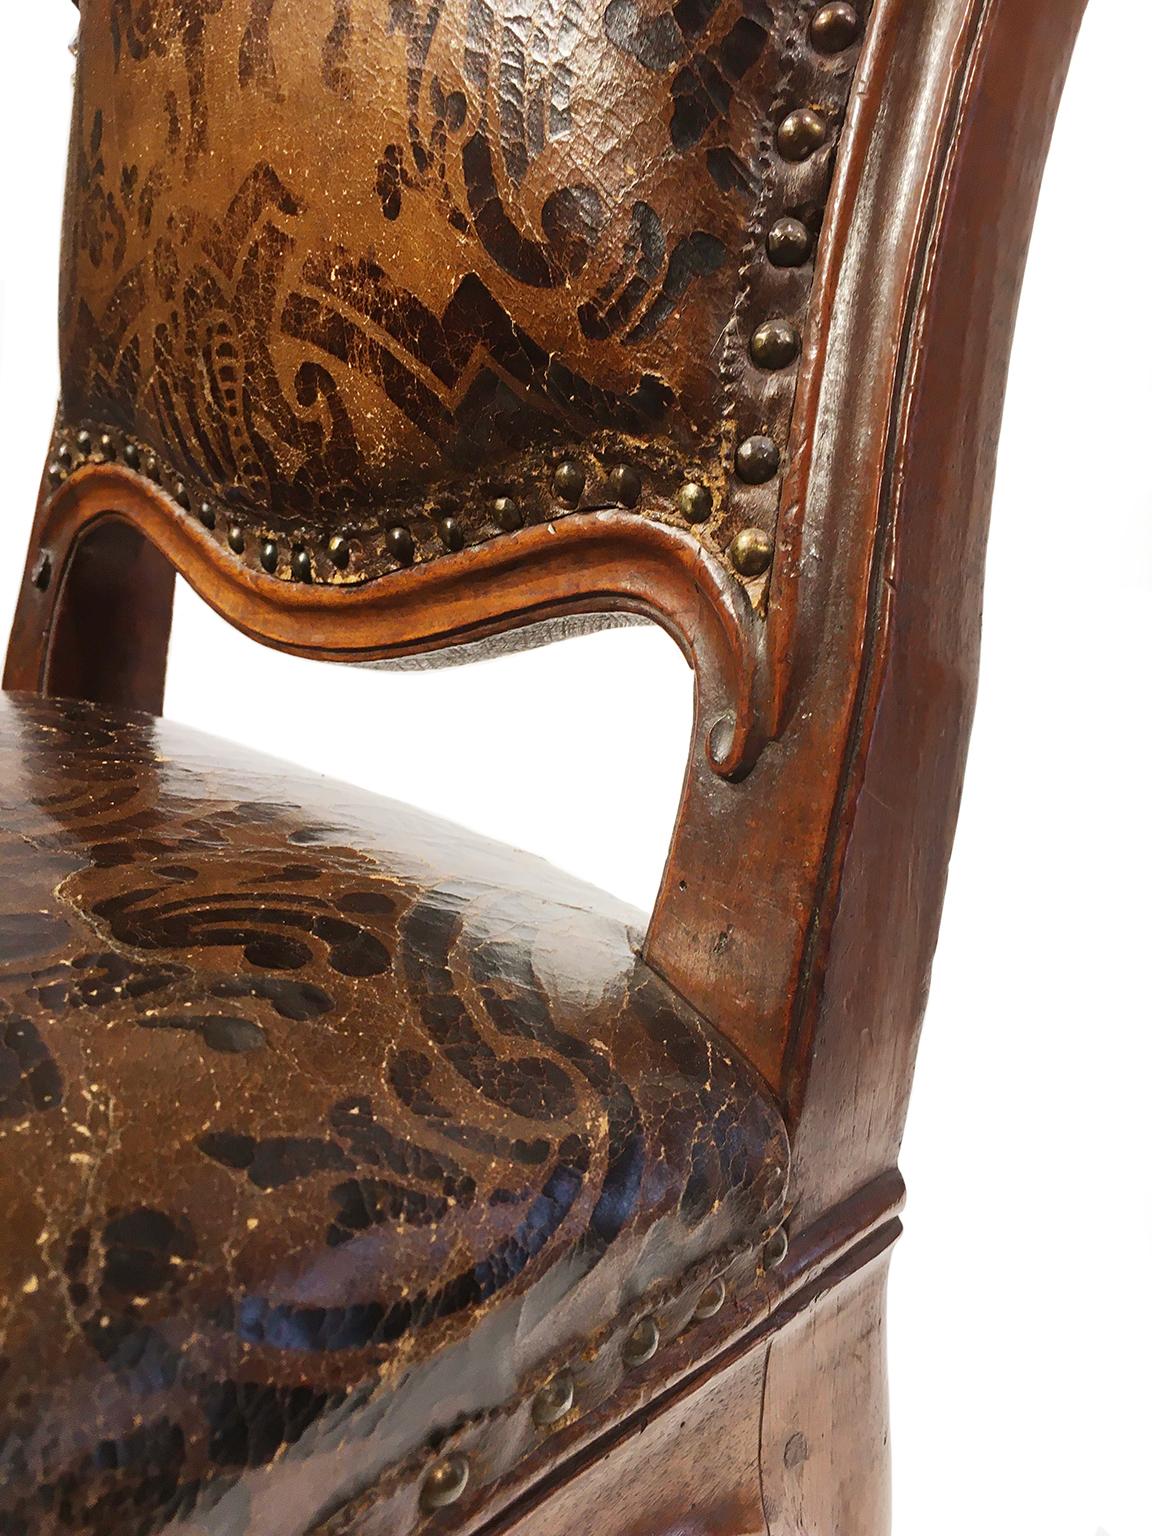 Italian Carved Walnut Chairs with Leather Covers, Milan, circa 1750 For Sale 10